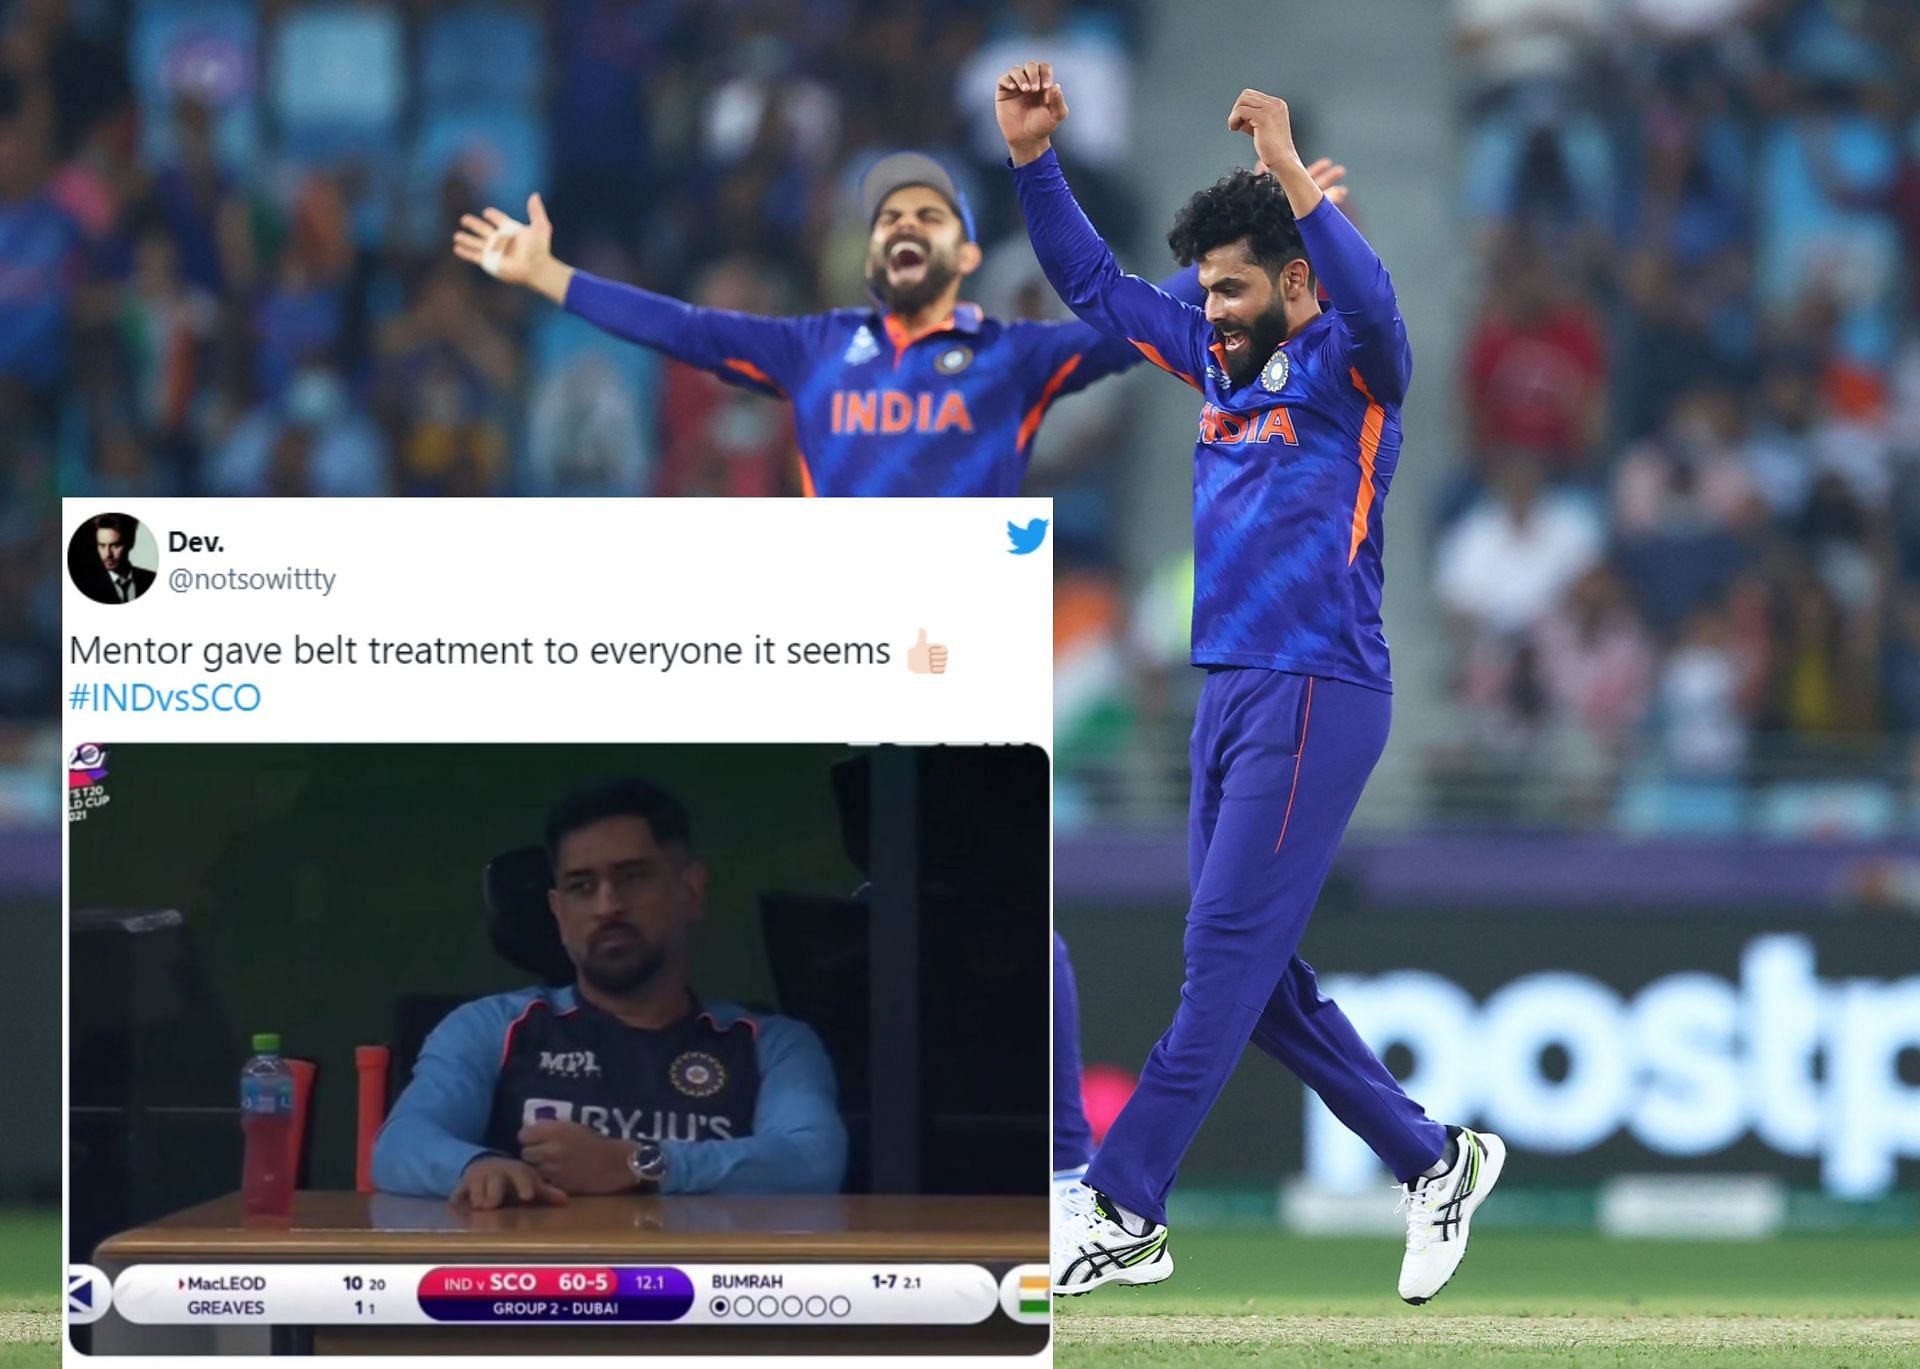 Fans hail Jadeja and other bowlers for their phenomenal effort against Scotland.